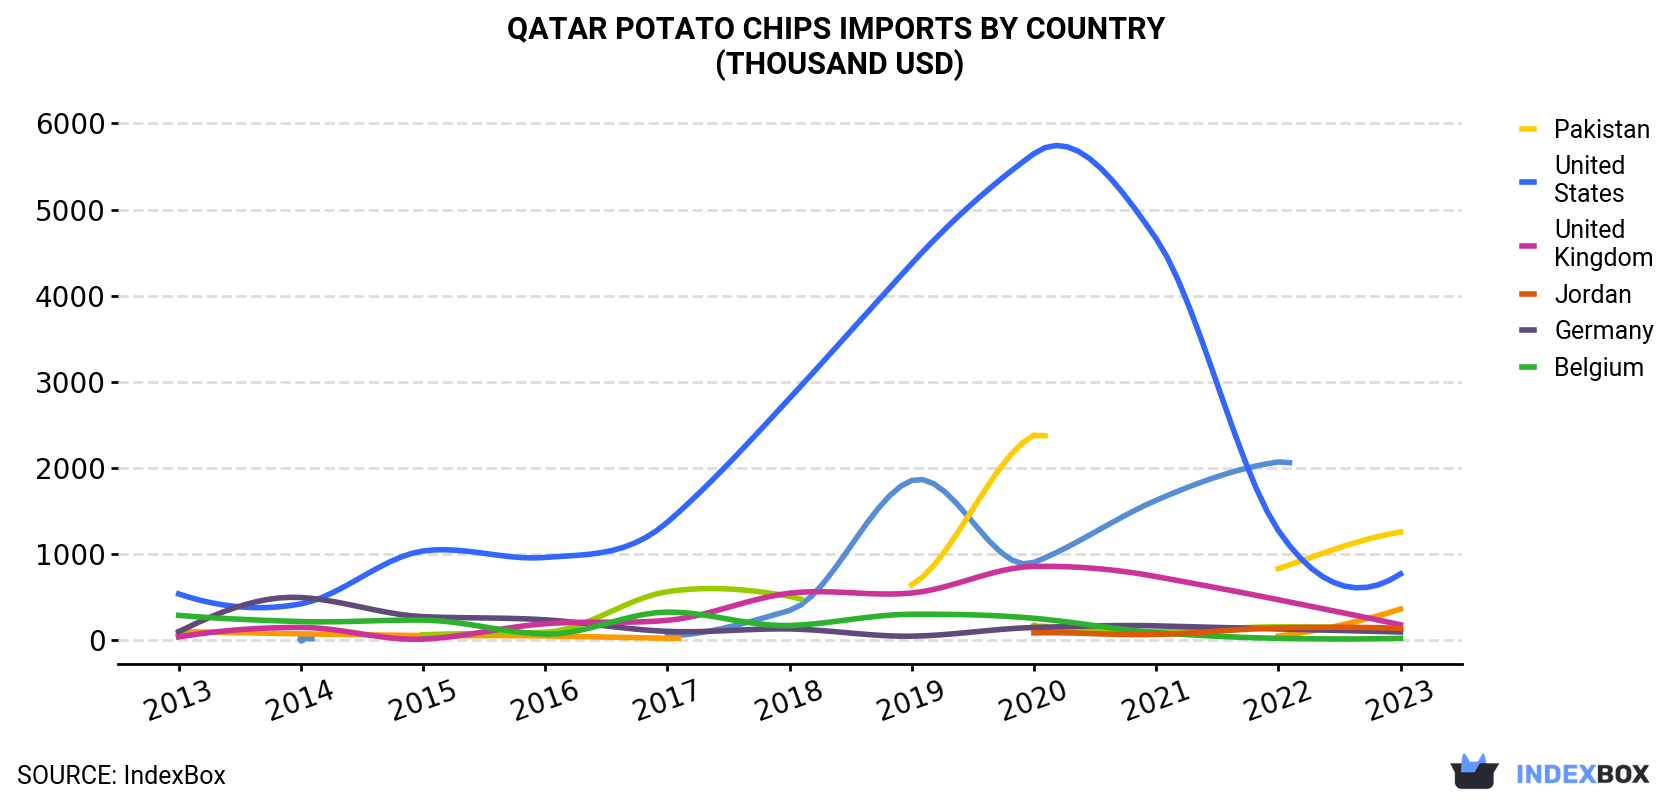 Qatar Potato Chips Imports By Country (Thousand USD)